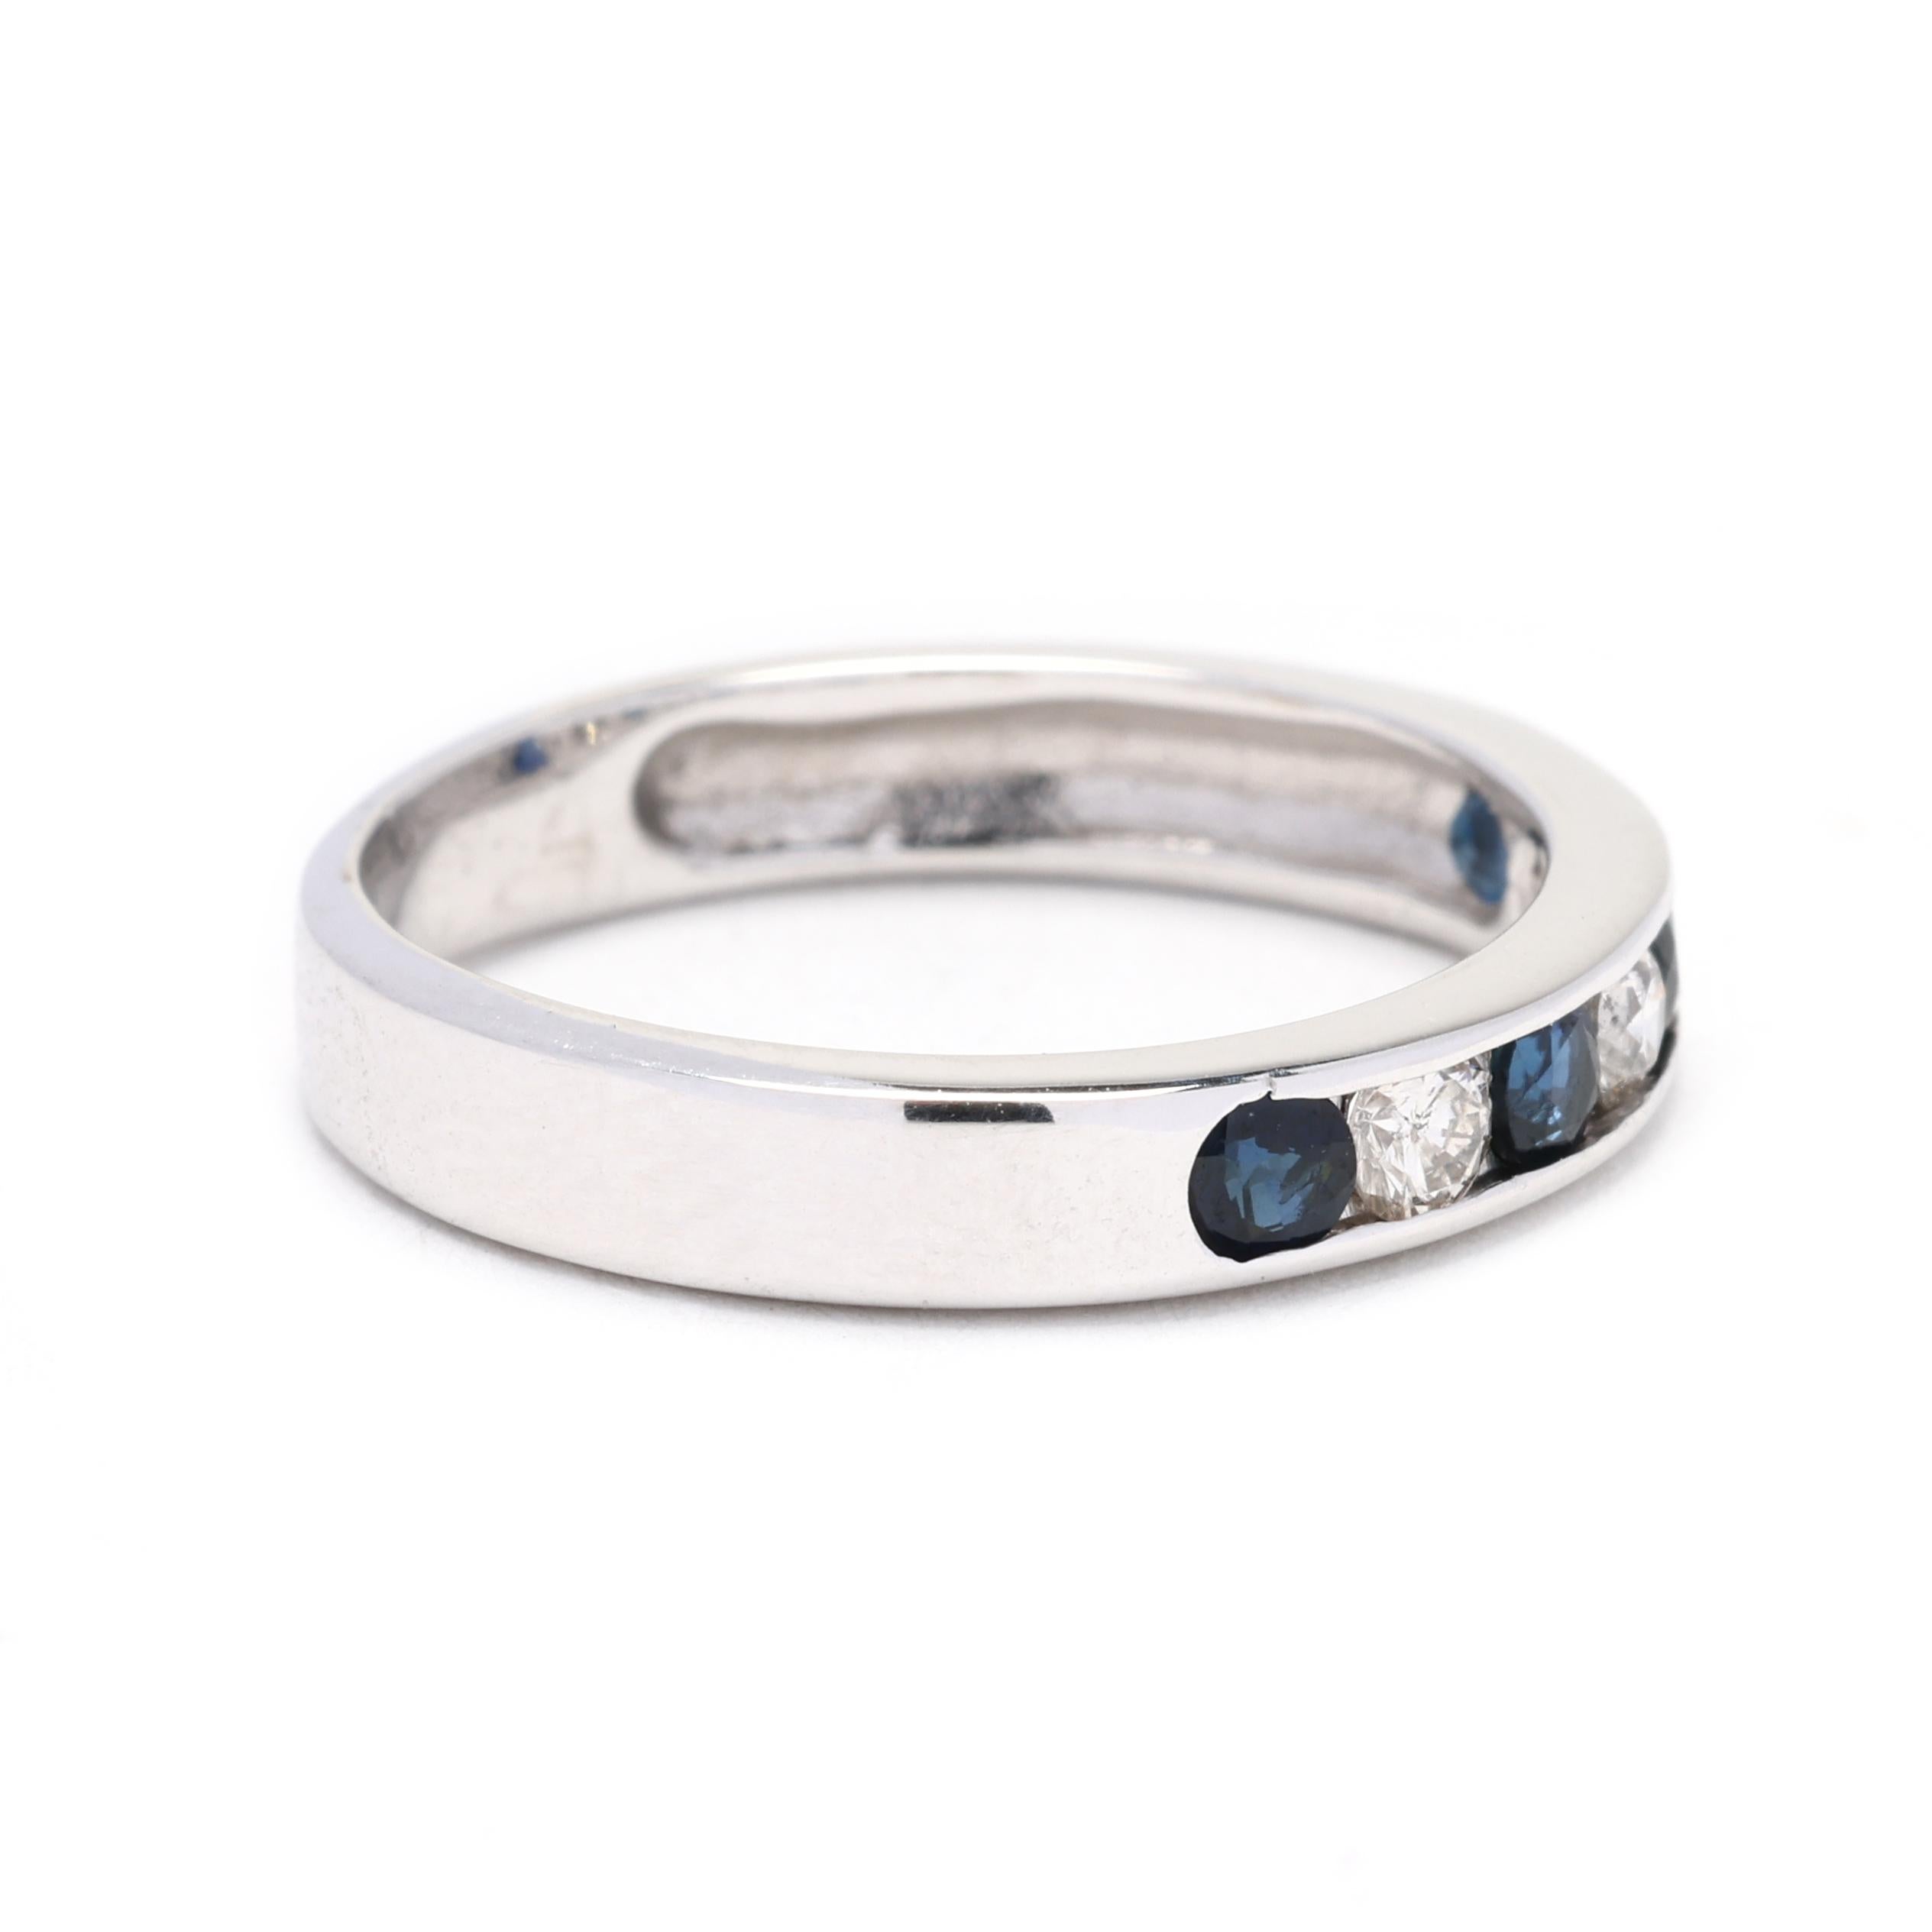 This beautiful 0.50ctw diamond and sapphire band ring is crafted in 14K white gold and is a size 5. It is the perfect stacking ring to add to your collection. The ring features alternating round diamonds and sapphires, creating a stunning and